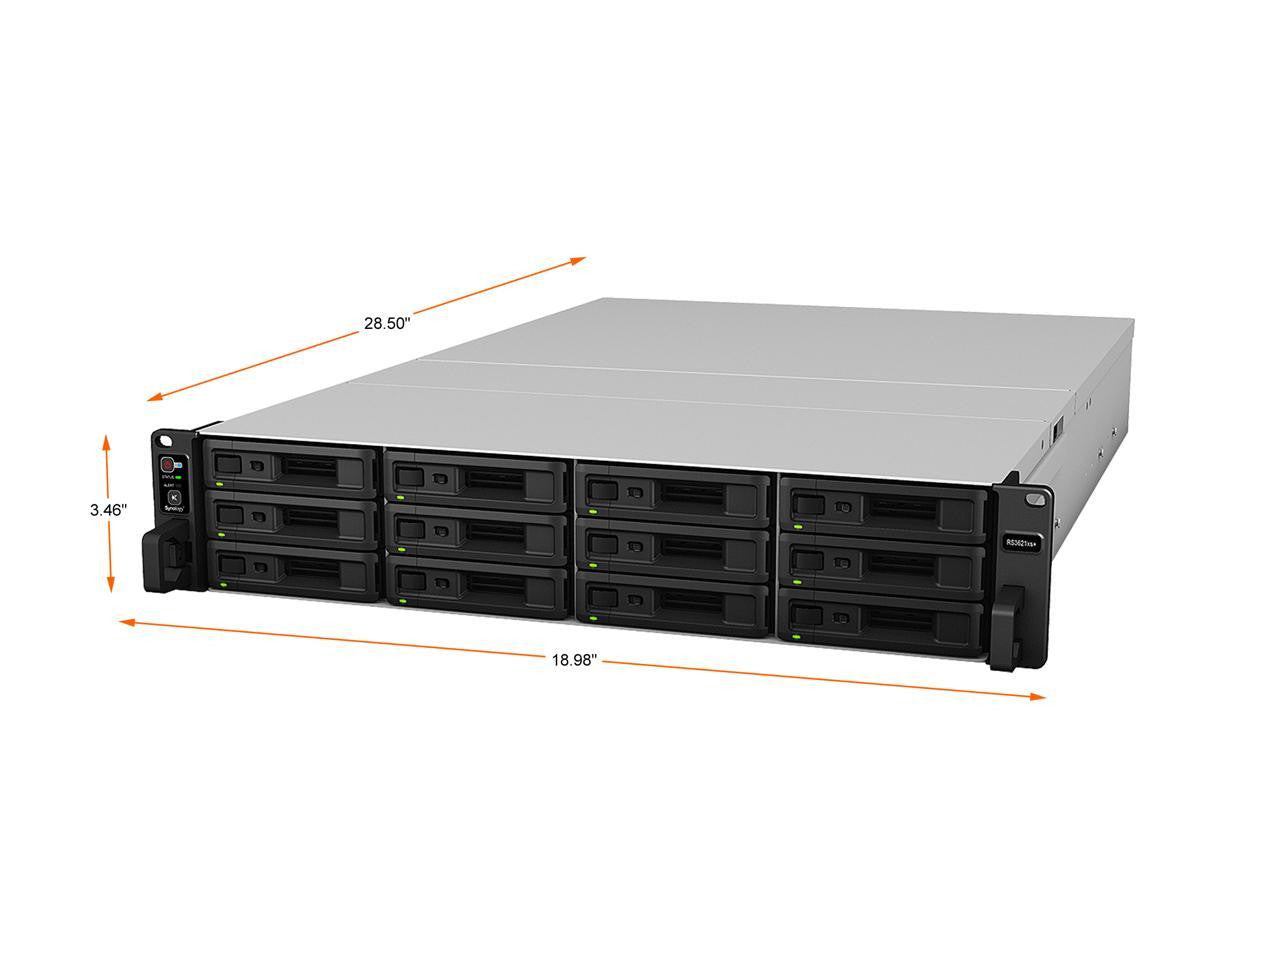 RS3621xs+ 12-BAY RackStation with 32GB RAM and 11.52TB (12 x 960GB) of Synology Enterprise Solid State Drives